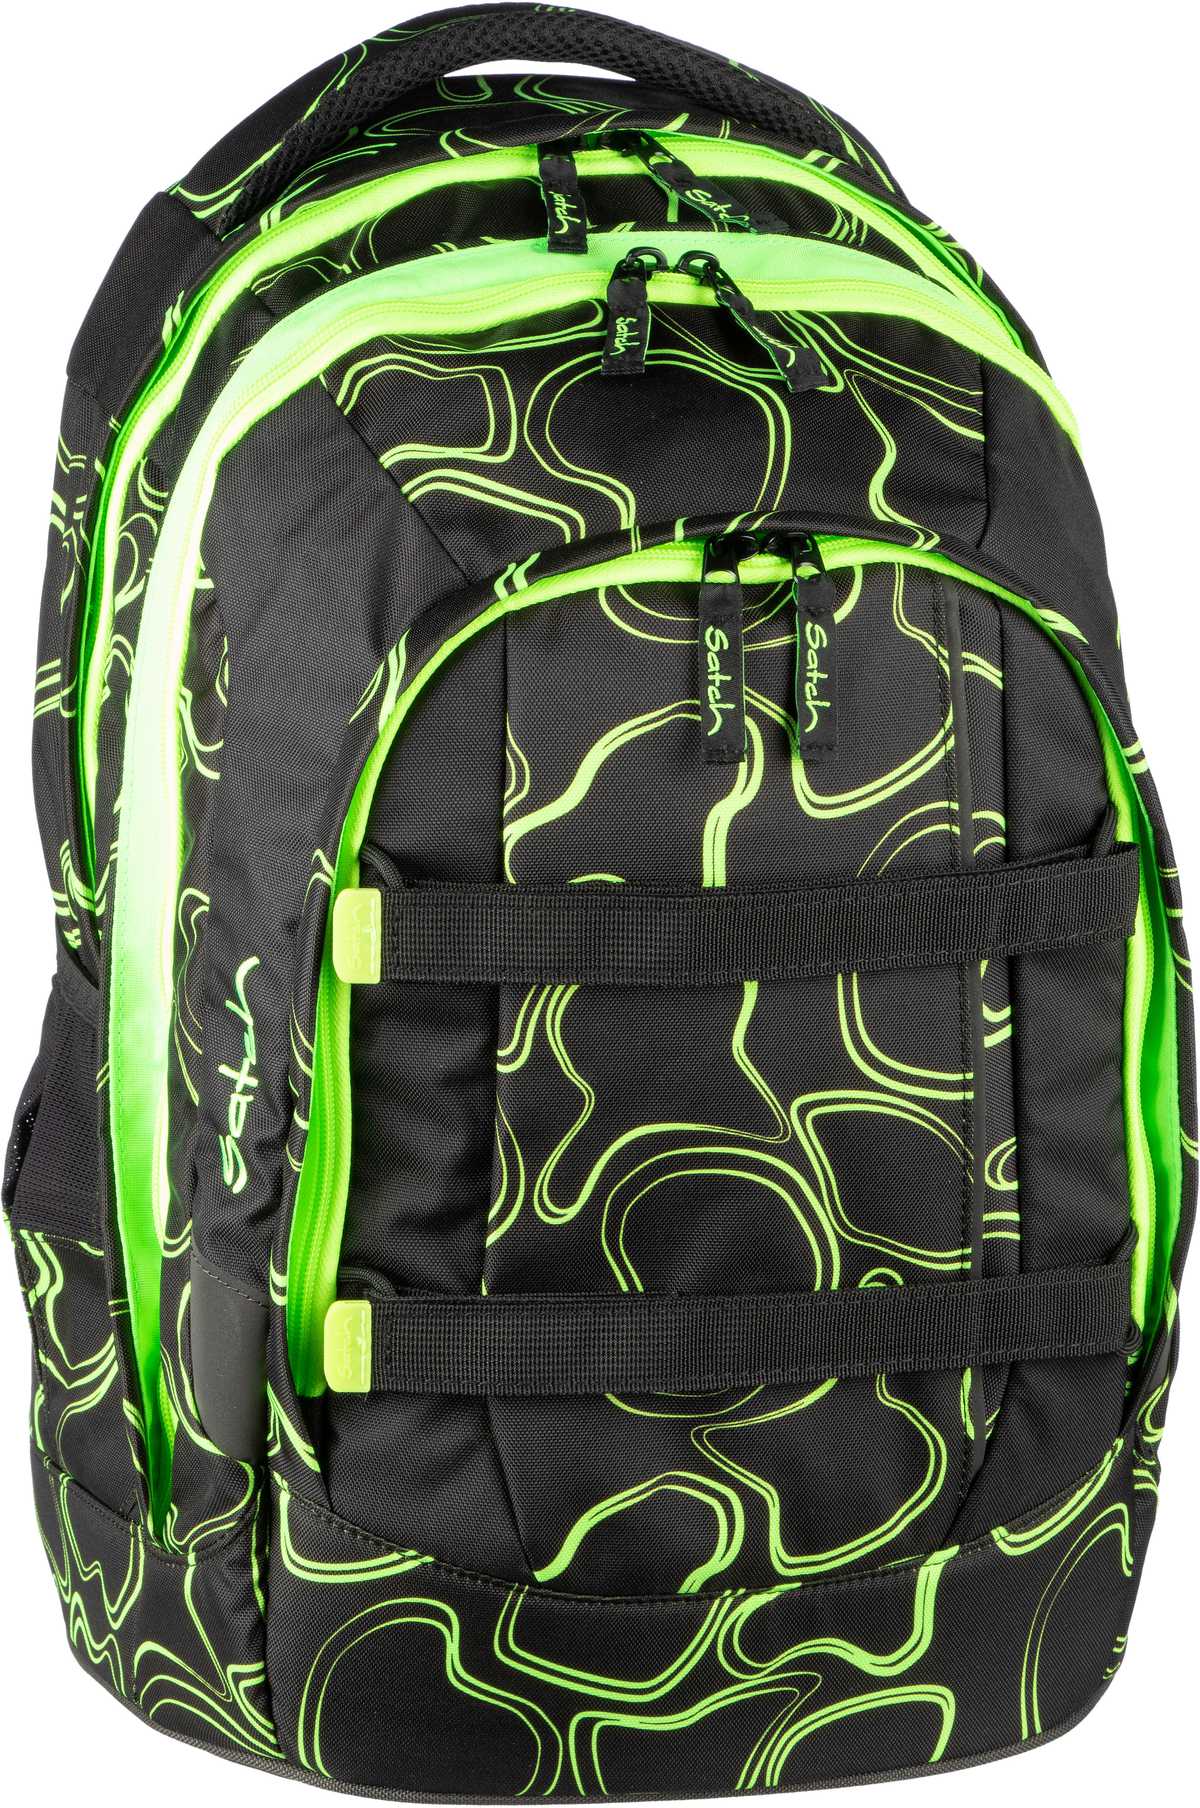 satch satch pack 4.0 - Green Supreme